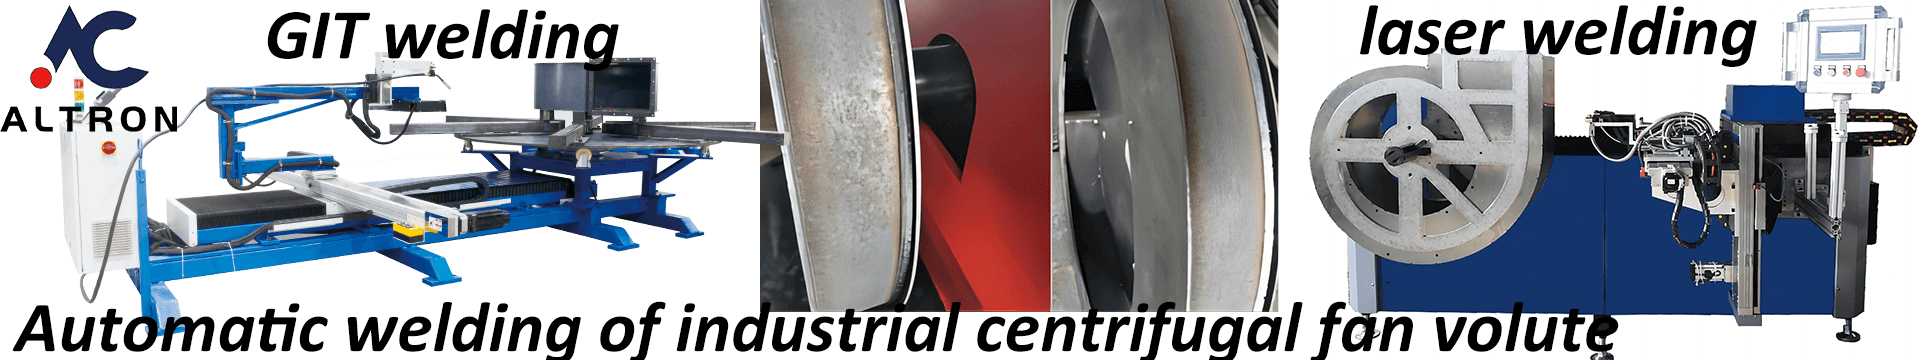 Automatic welding of industrial centrifugal fan volute